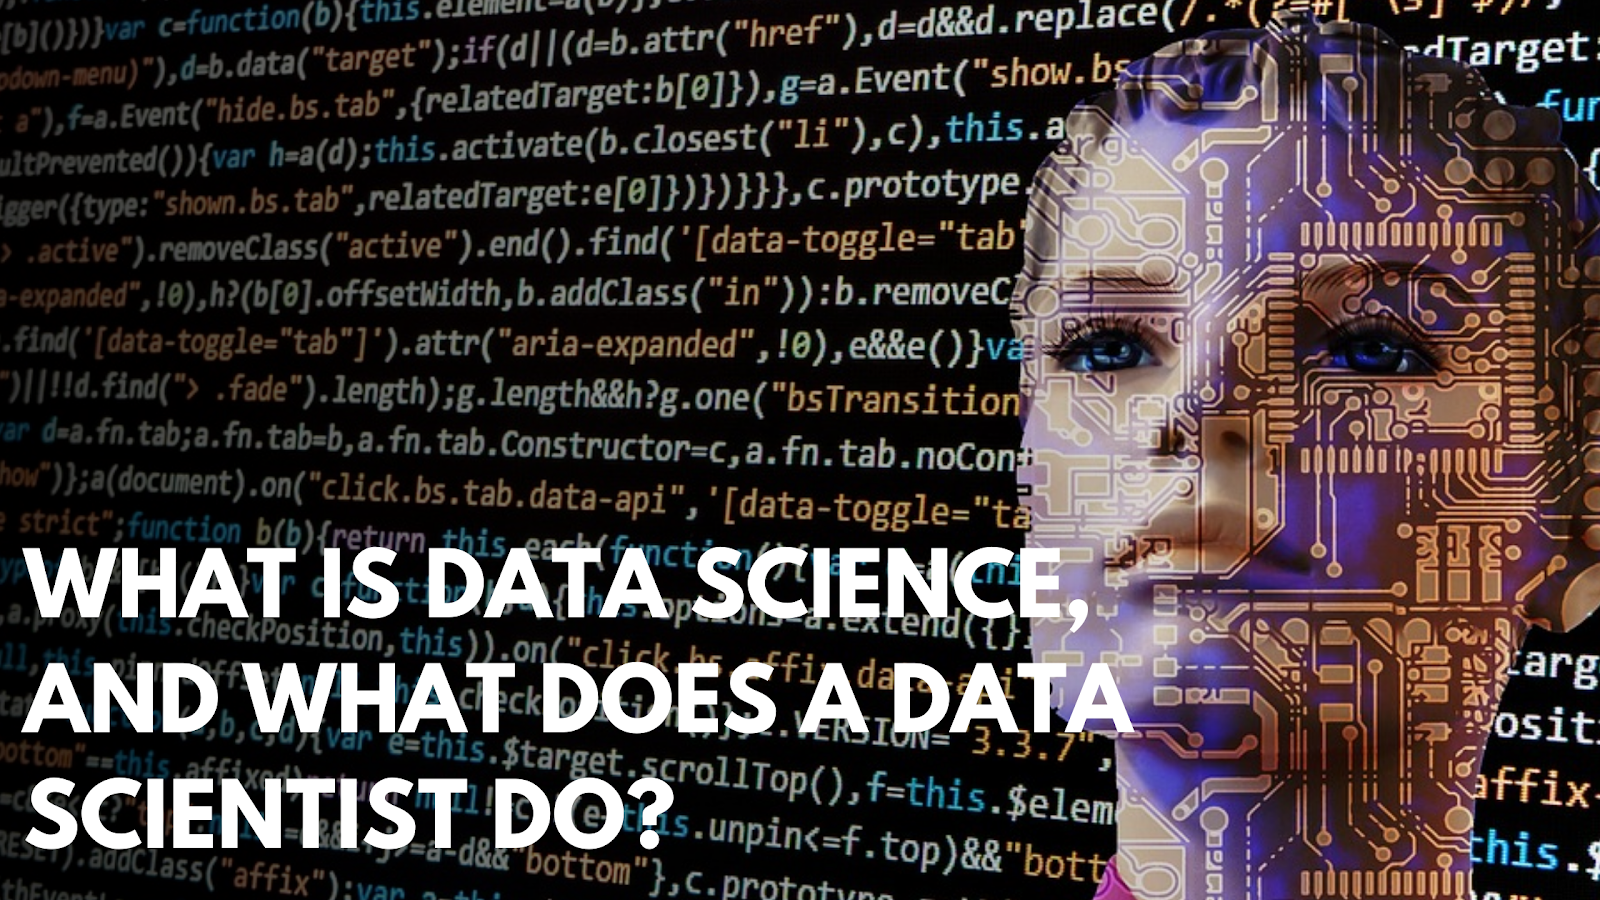 What Is Data Science, and What Does a Data Scientist Do?